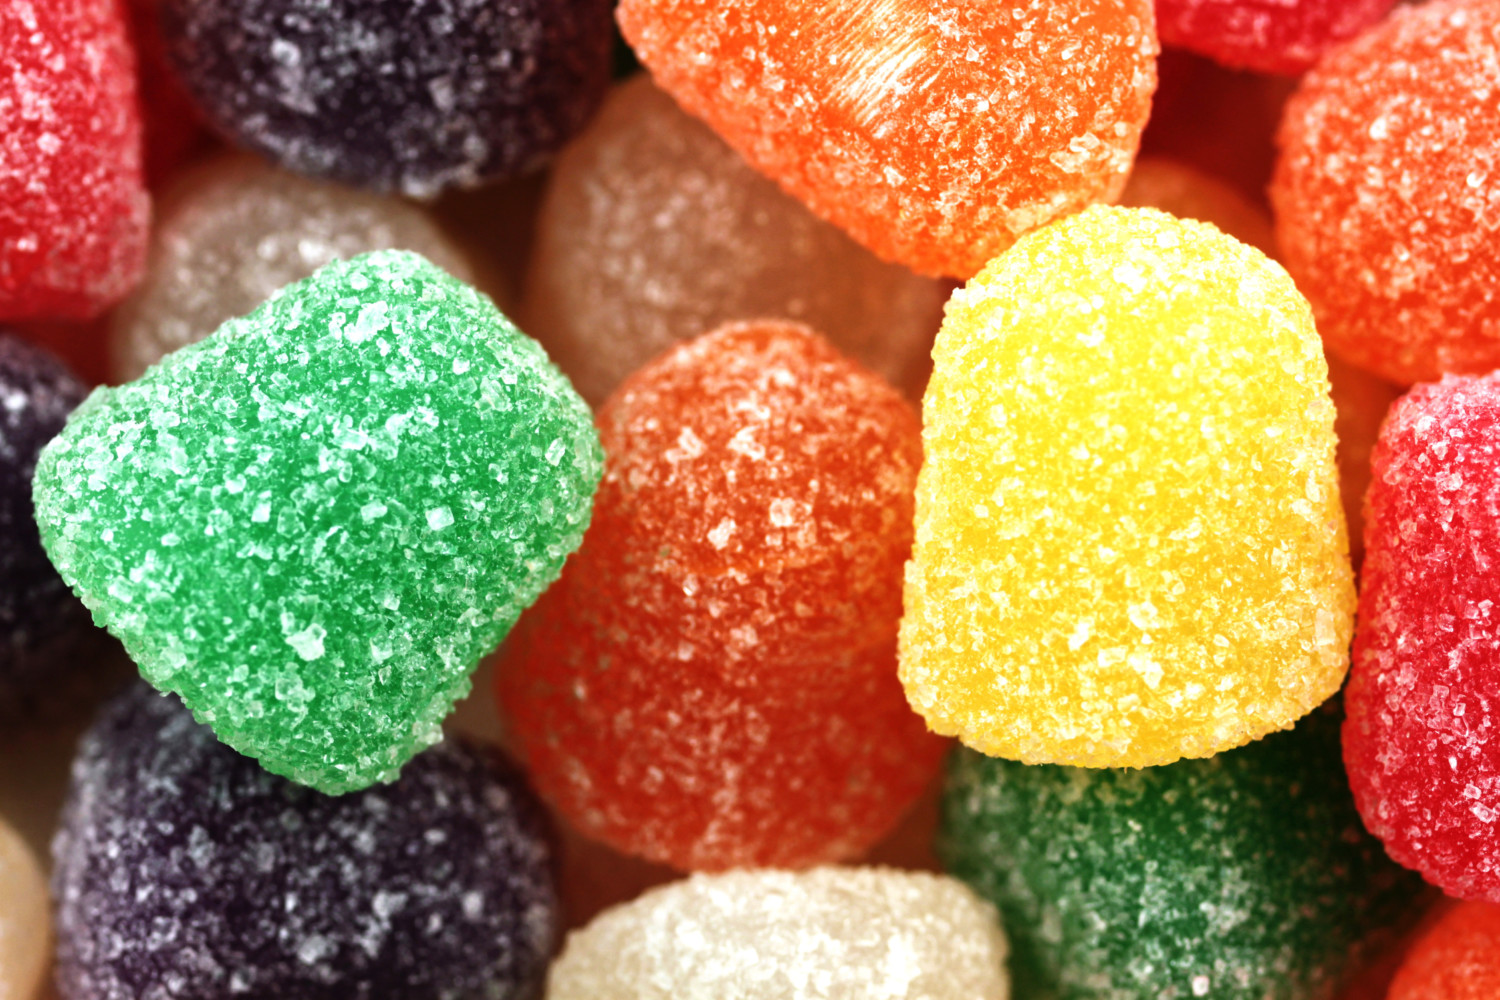 A close up image of colored gumdrops